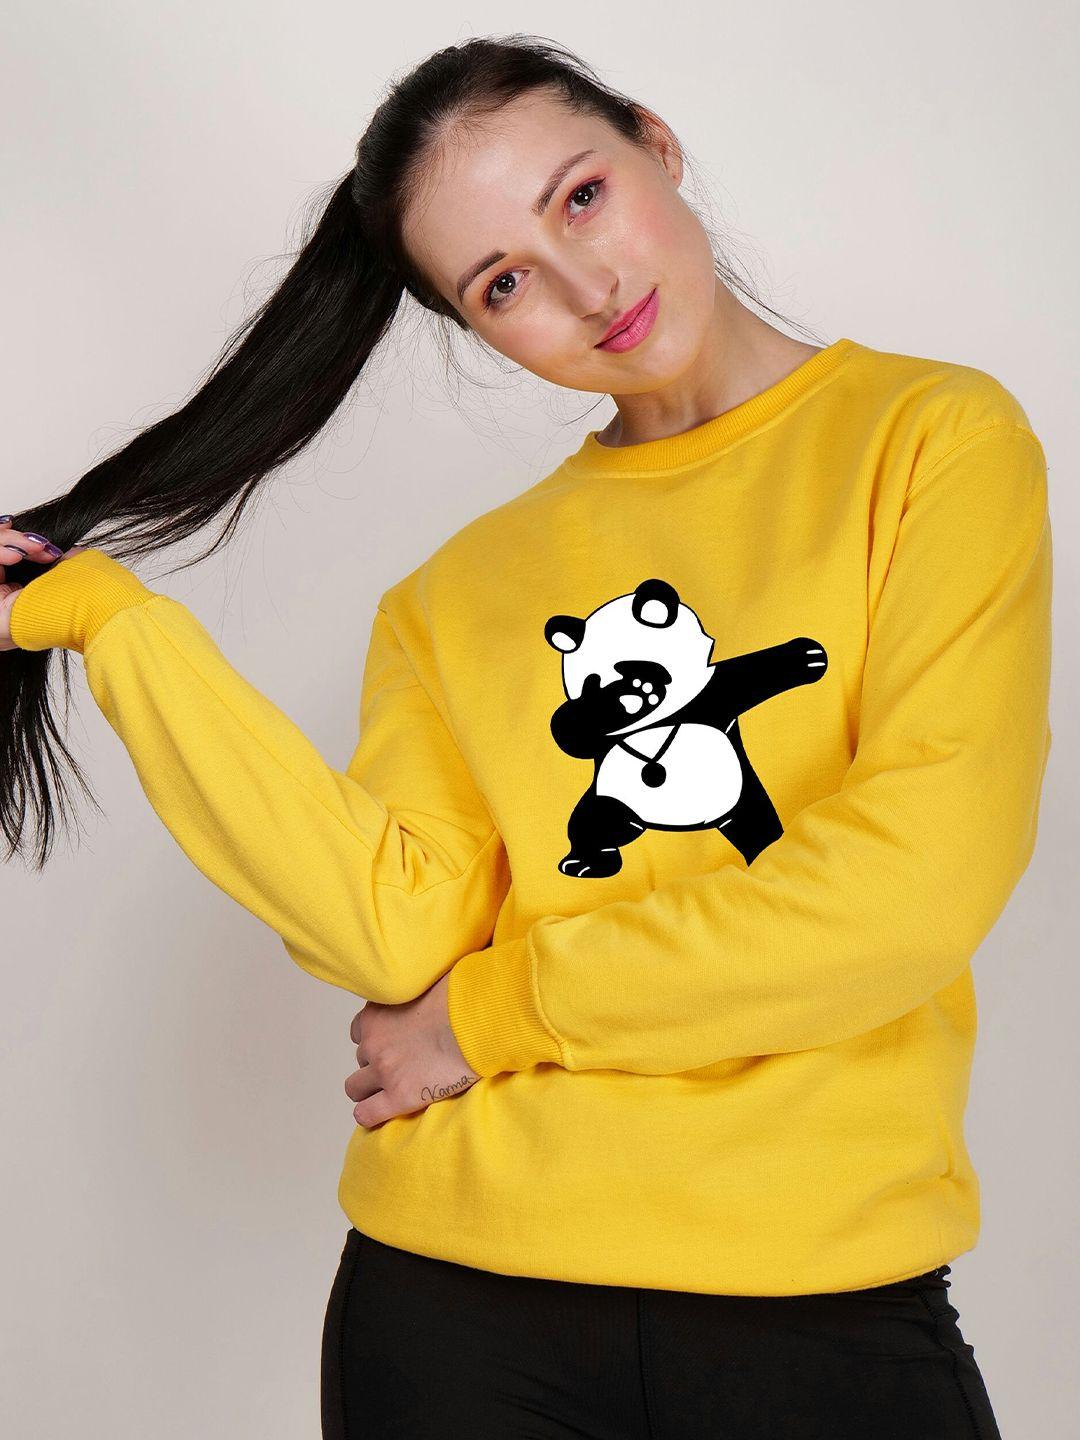 fashion and youth graphic printed round neck fleece pullover sweatshirt